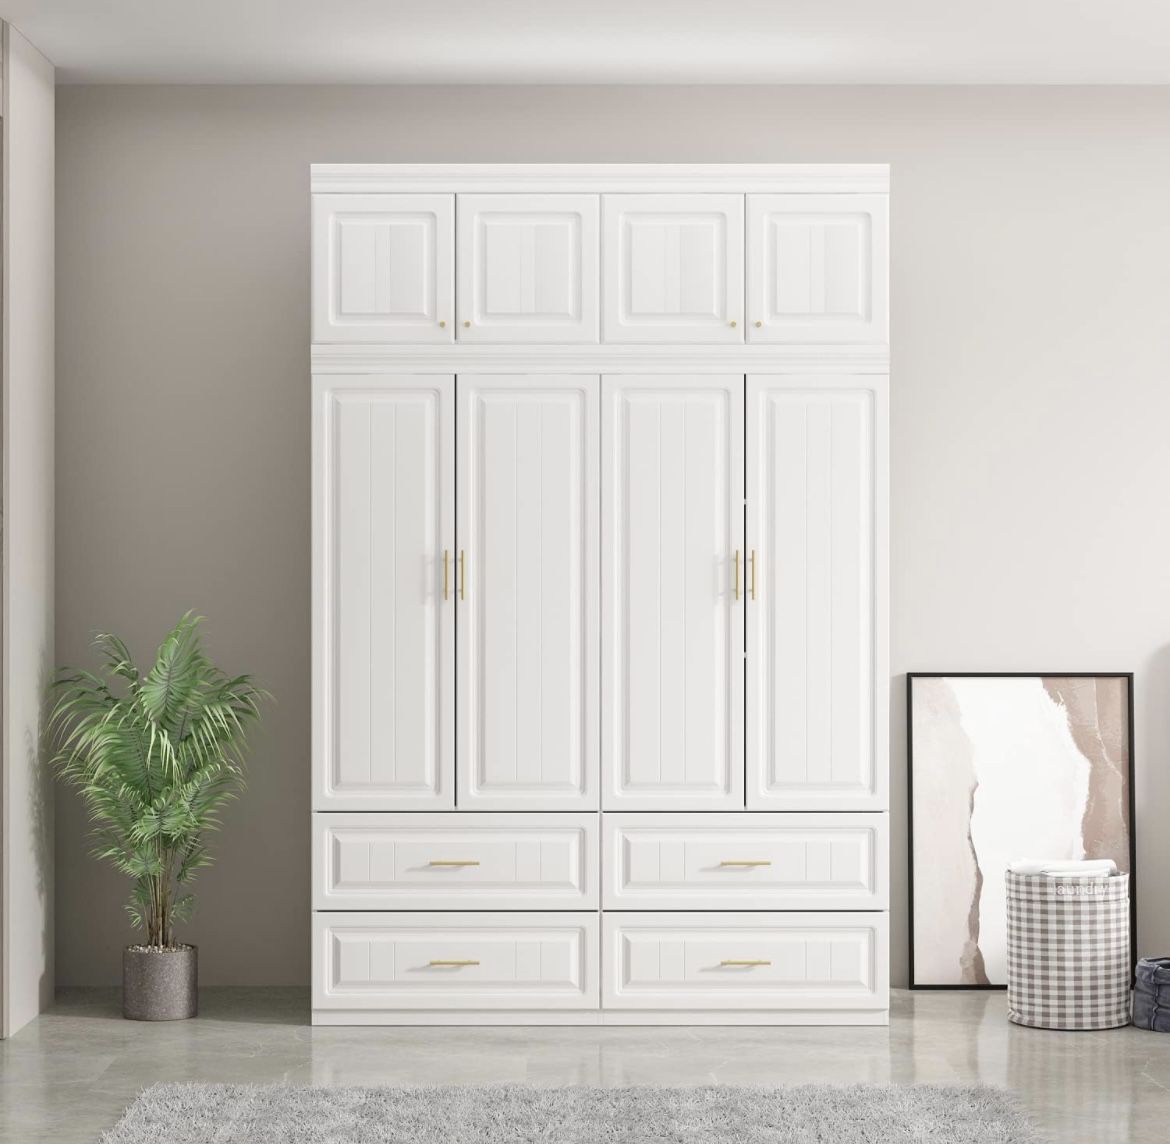 4 Doors Wardrobe Armoire with 4 Drawers, 63" Wide Large Freestanding Armoire Wardrobe Closet with Shelves, Hanging Rod & Top Storage Cabinet, Bedroom 